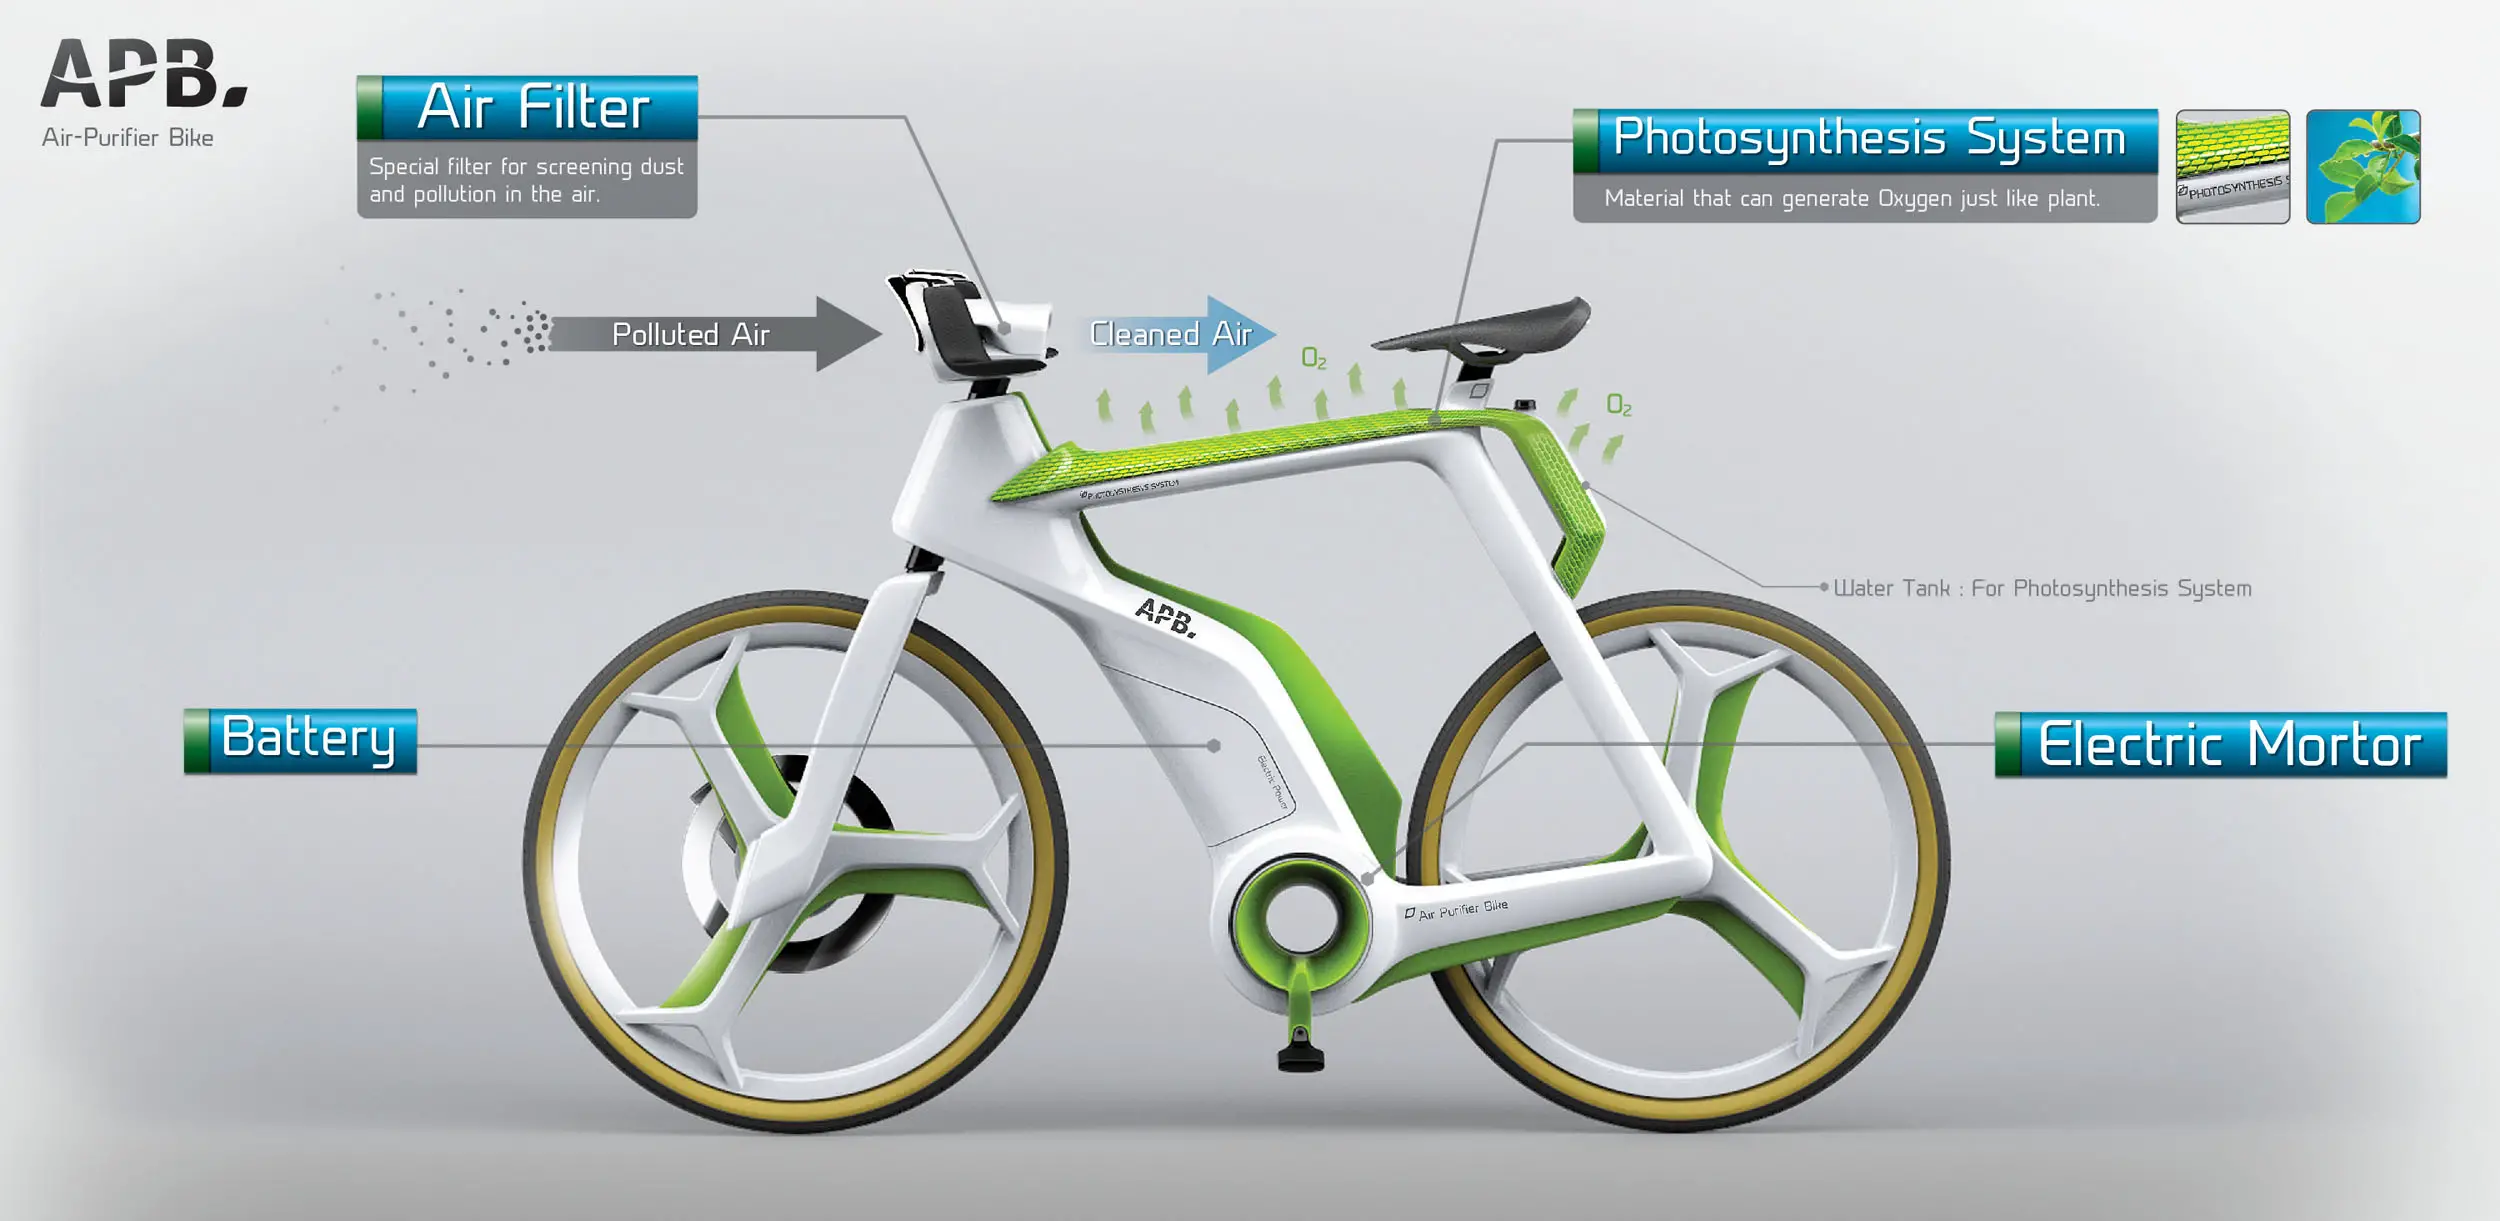 Air-Purifier Bike Filters The Air and Produces Oxygen to Reduce Air Pollution